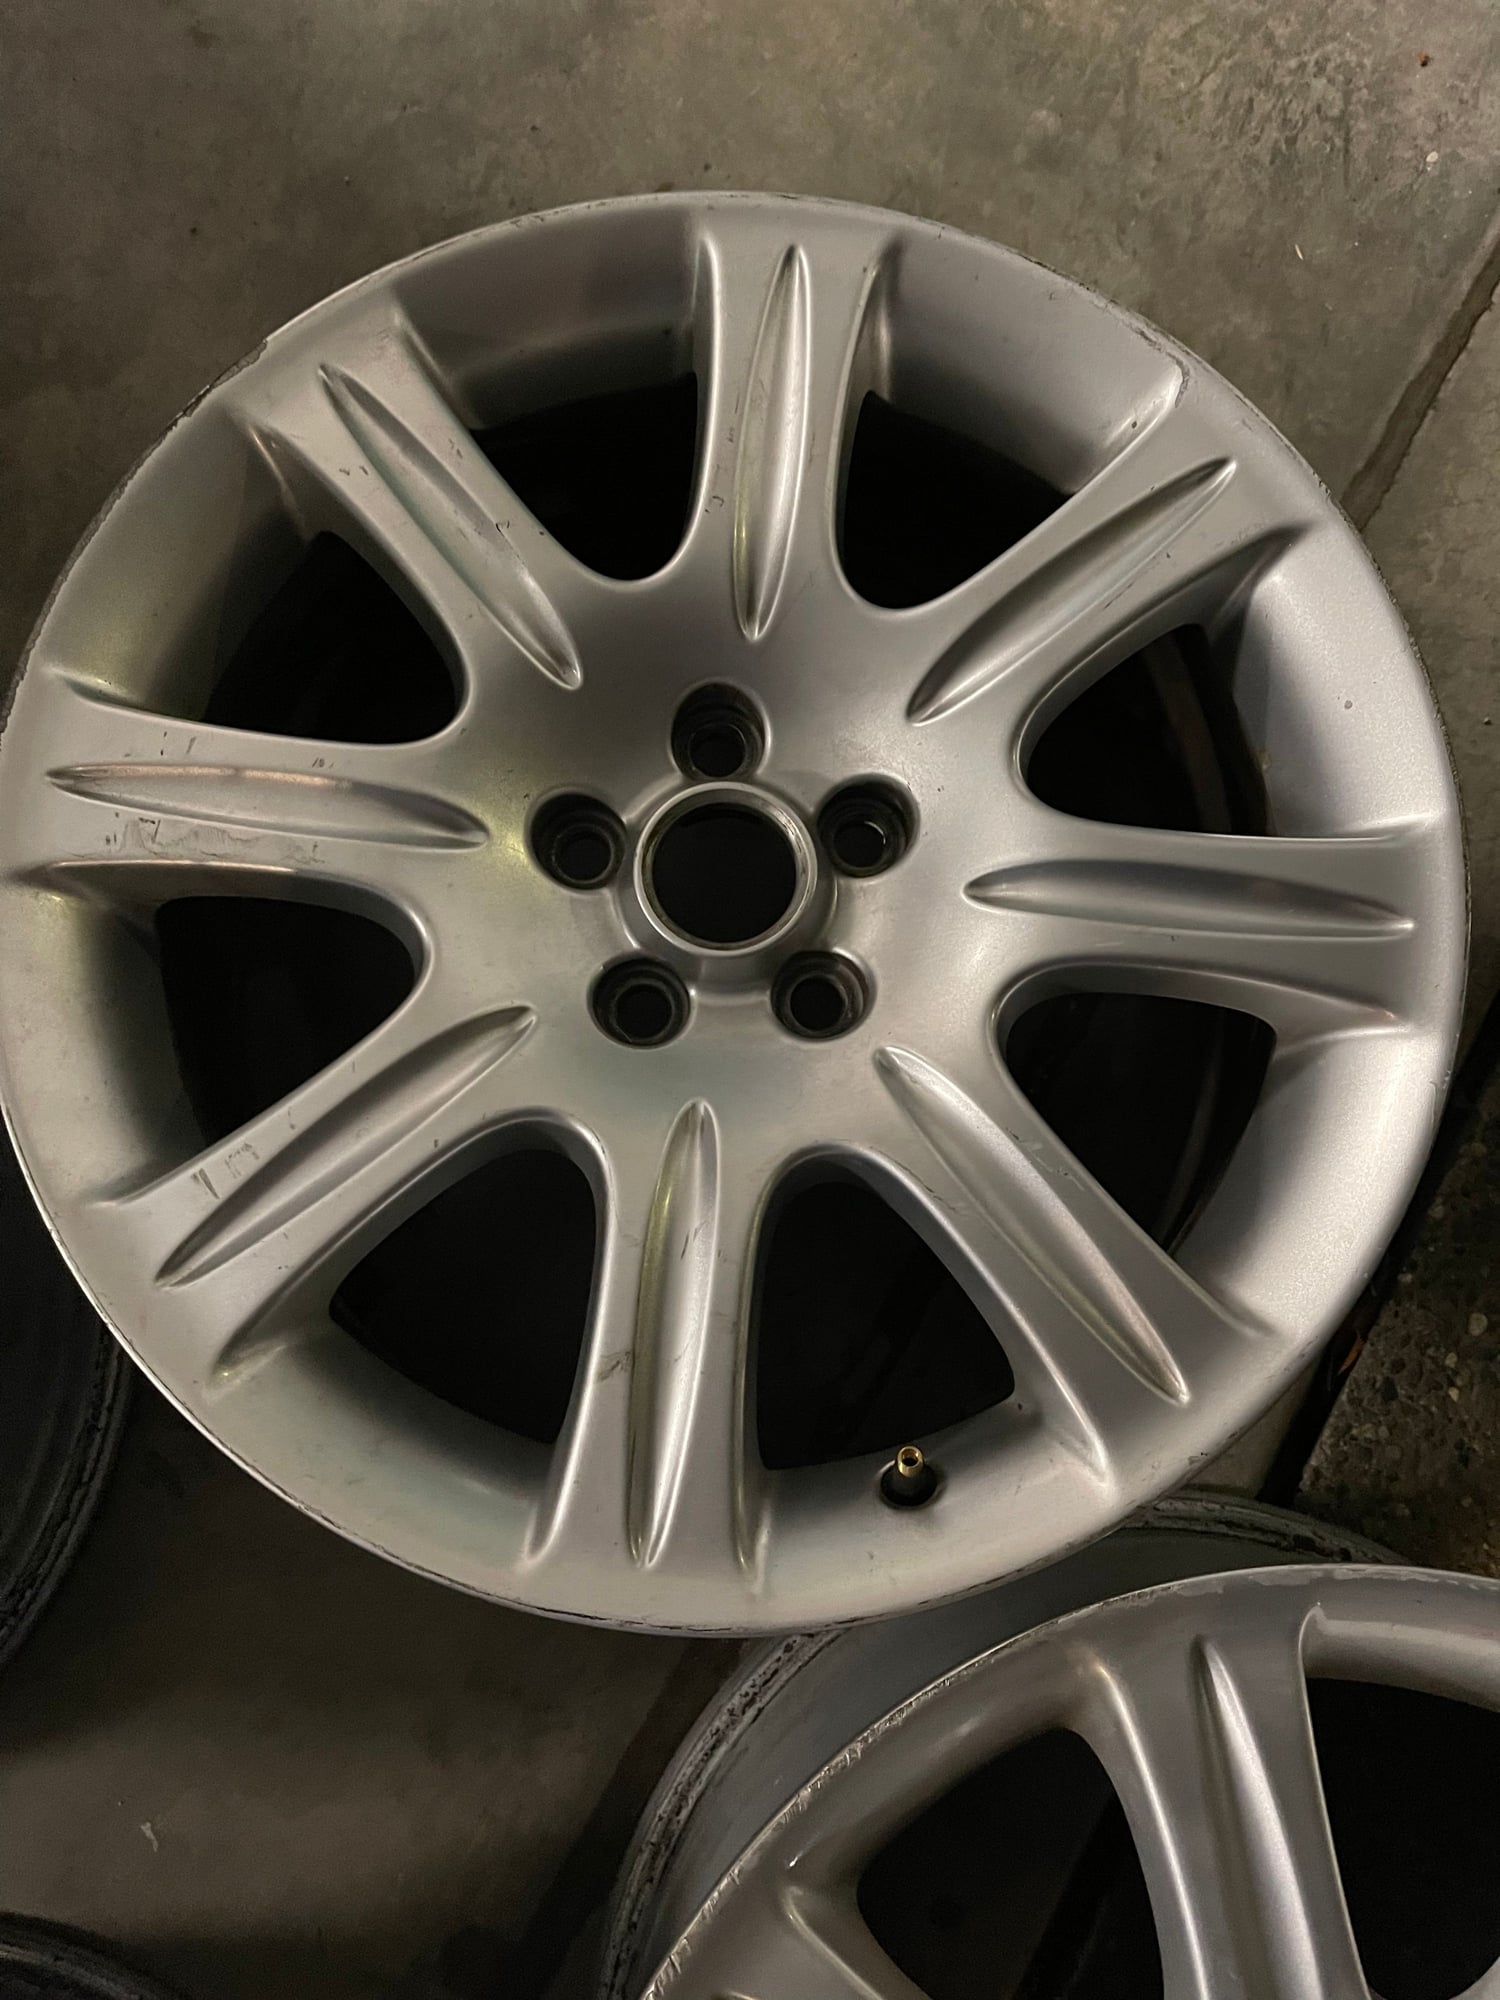 Wheels and Tires/Axles - XJ8 Dynamic 18x8 rims - set of 4.  8 on a scale if 10 - Used - 2004 to 2009 Jaguar XJ8 - Seattle, WA 98101, United States